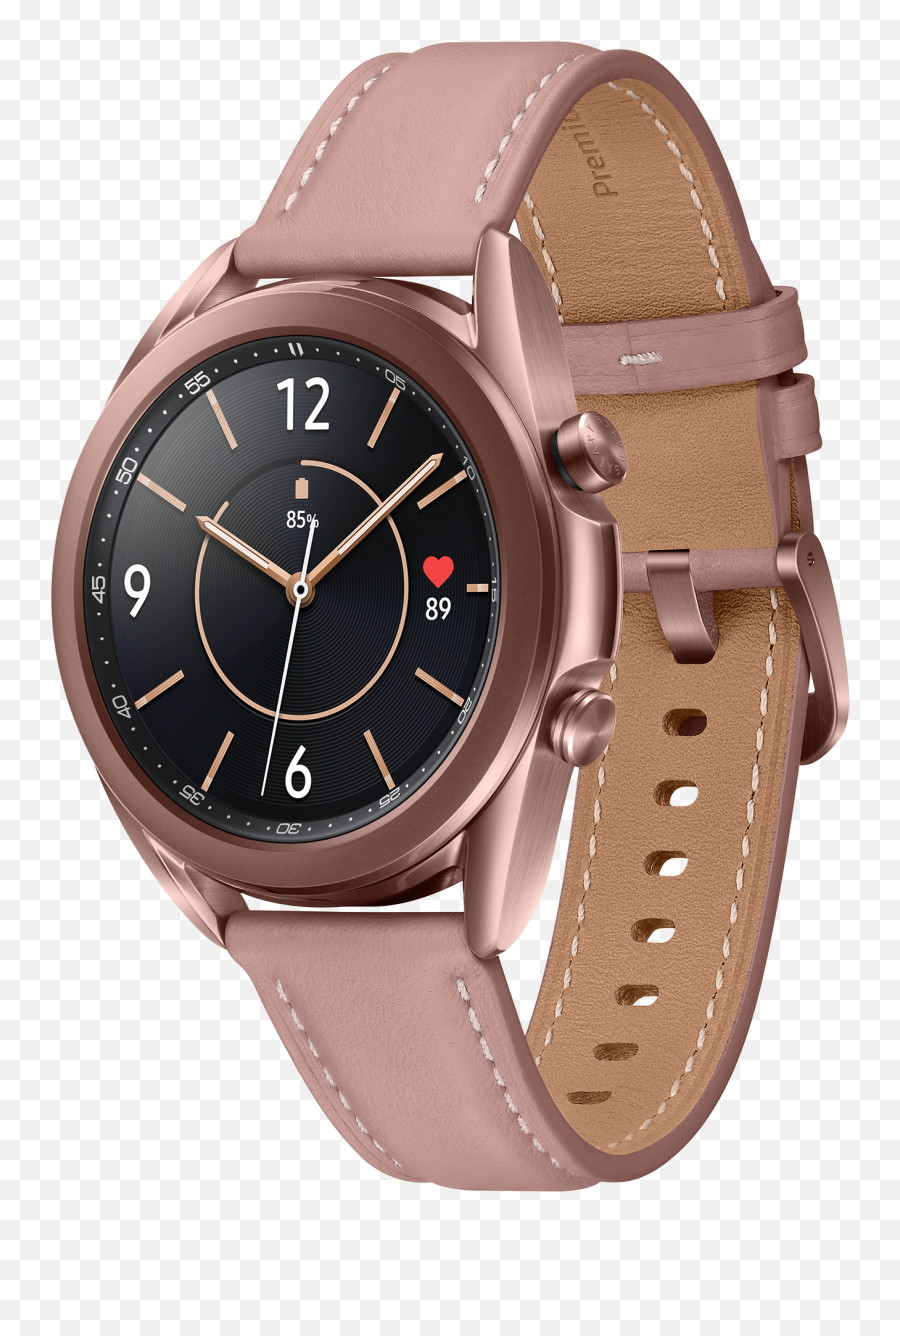 Galaxy Watch3 And Galaxy Buds Live Now Available U2013 Samsung - Samsung Galaxy Watch 3 Emoji,Samsung Emoticons